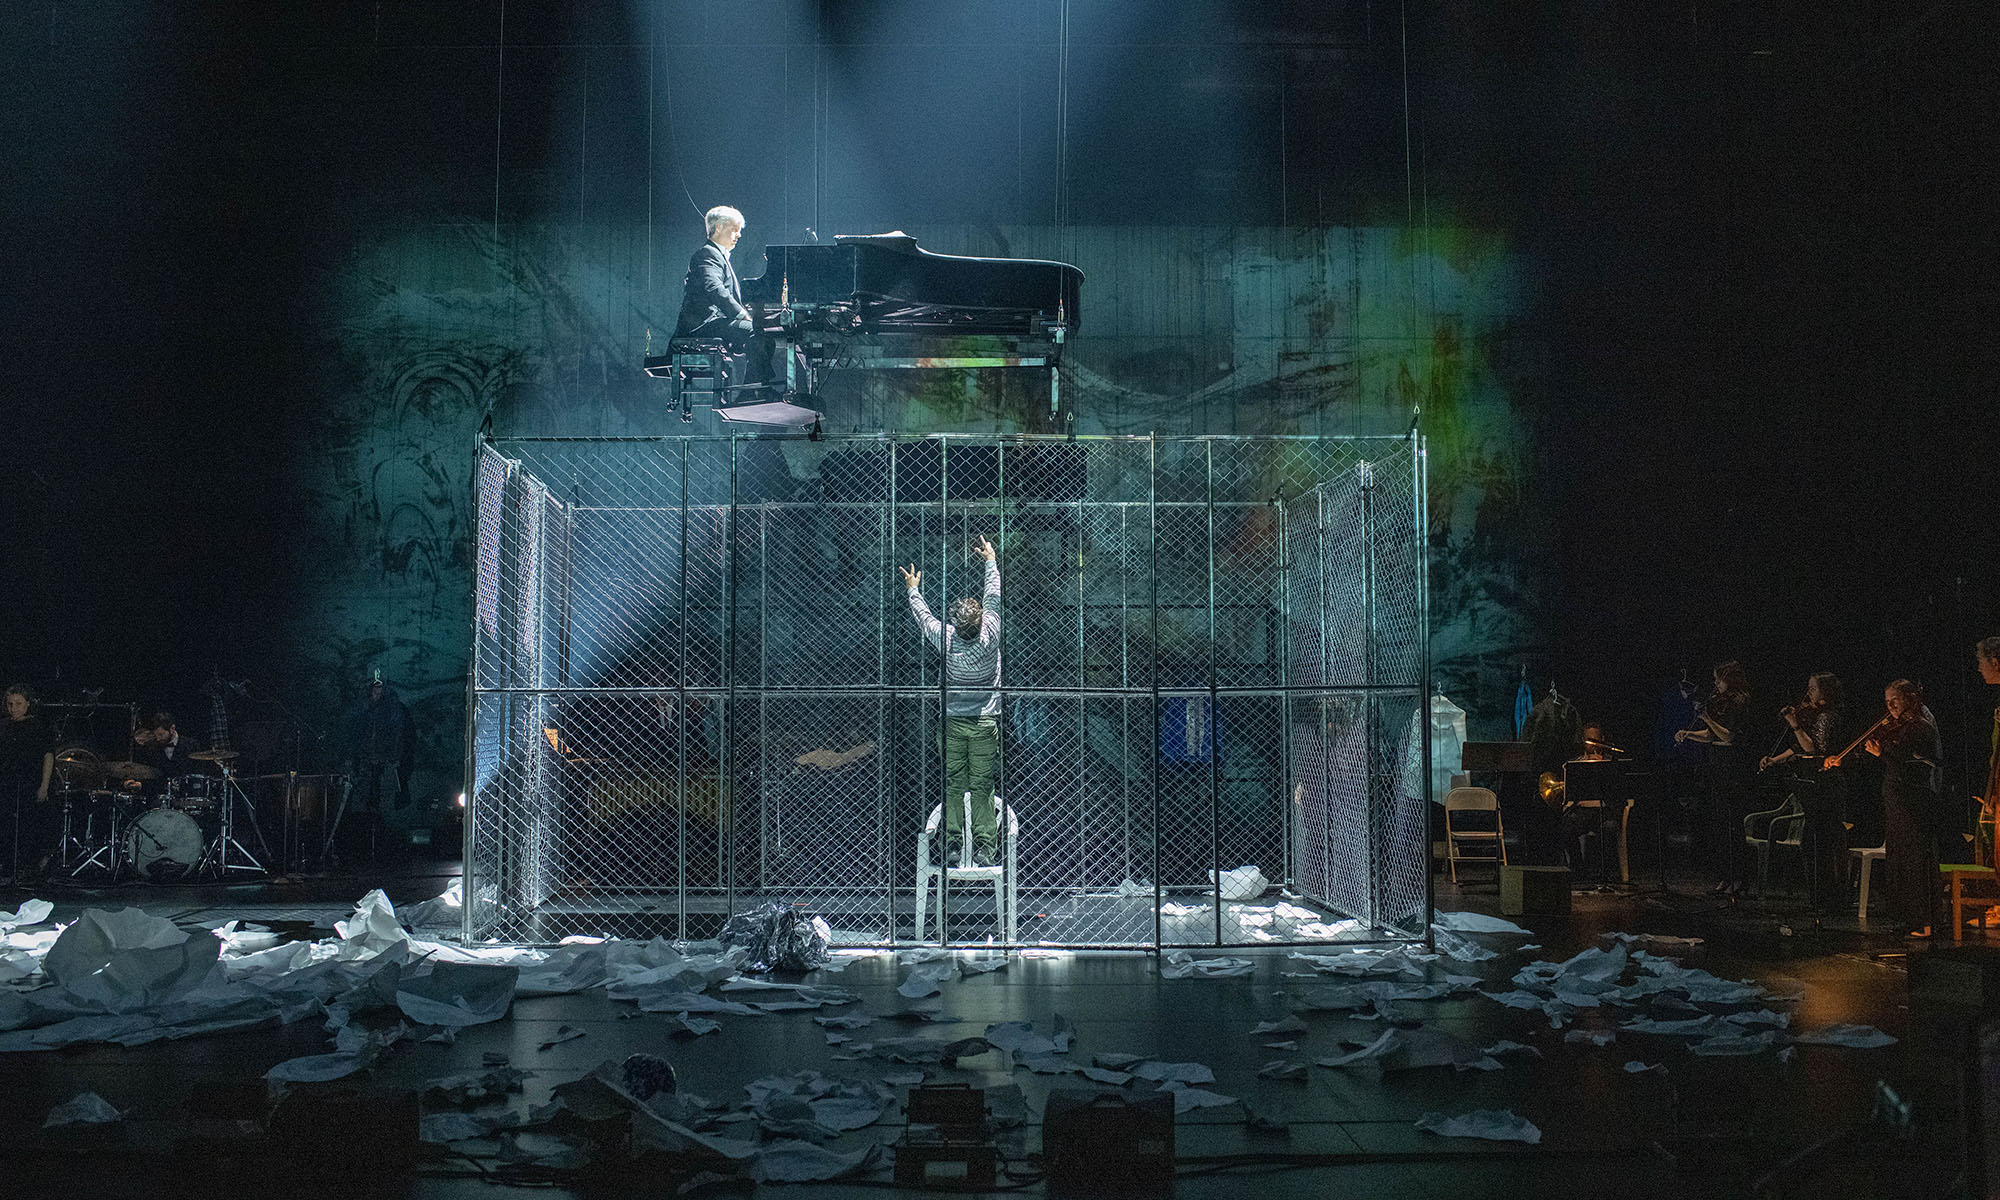 Man in cage reaches up toward piano player in scene from Paper Pianos.